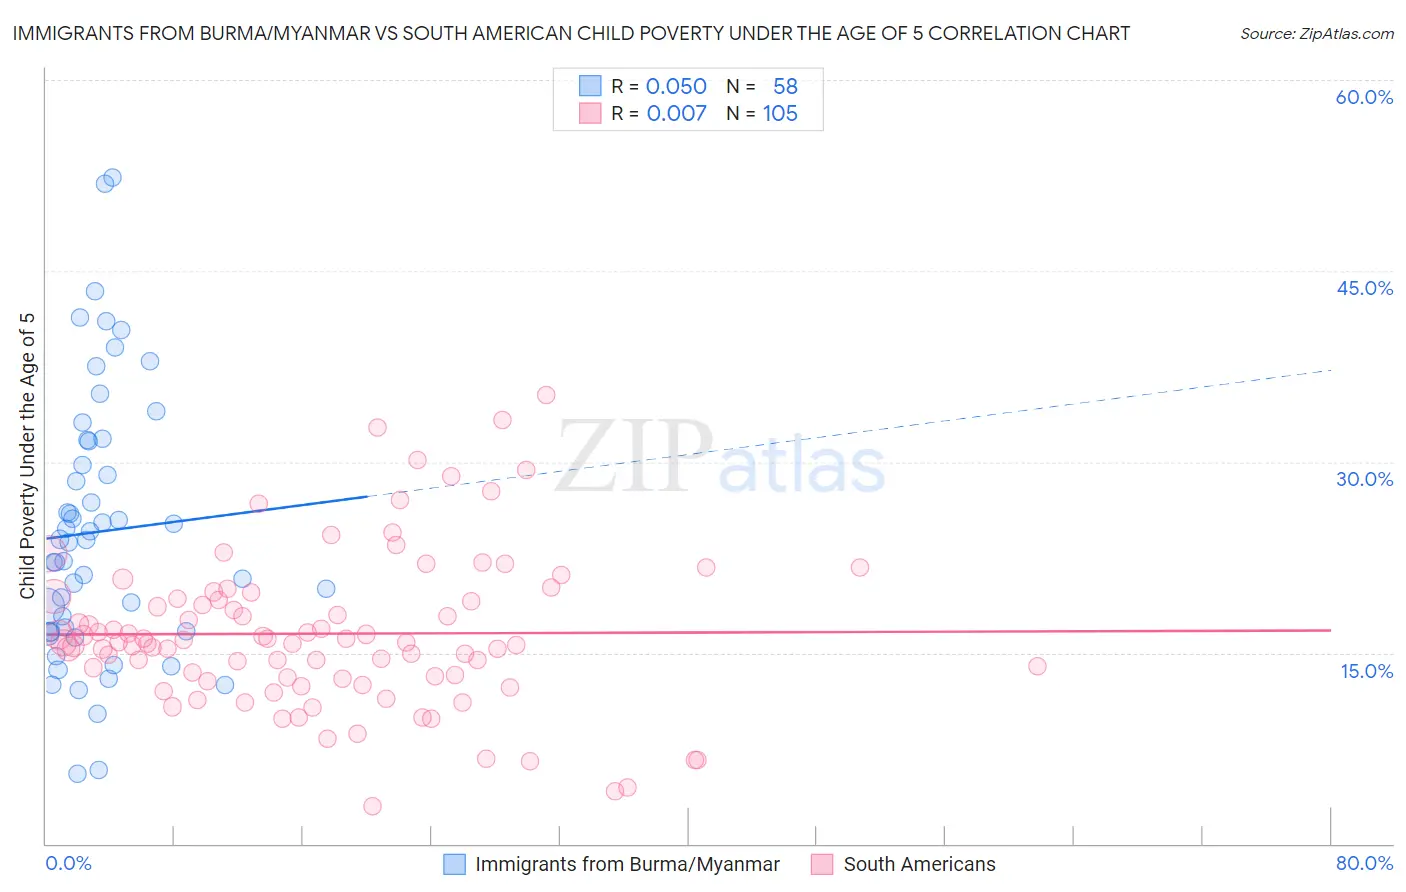 Immigrants from Burma/Myanmar vs South American Child Poverty Under the Age of 5